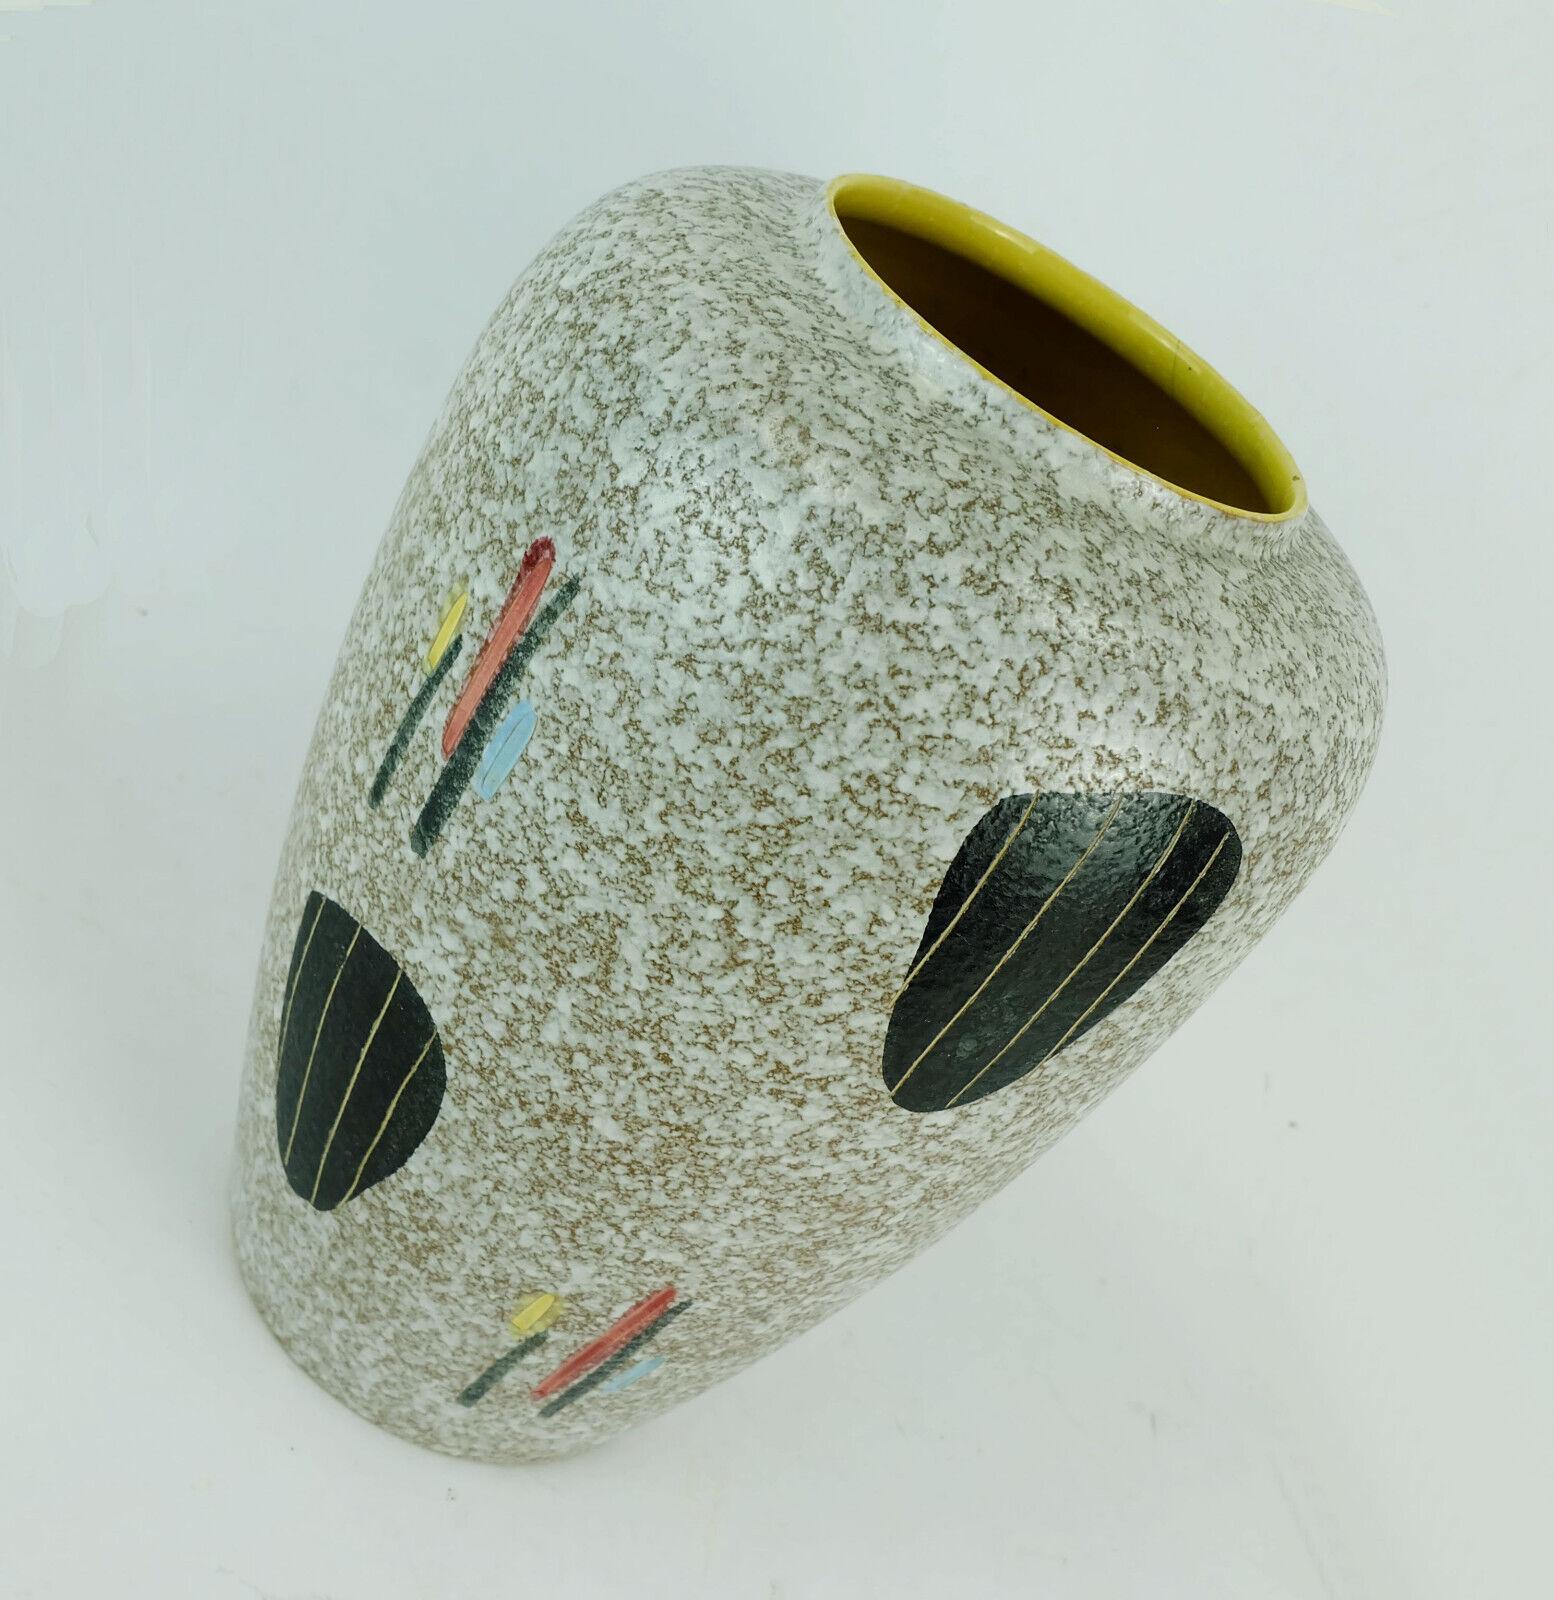 West german mid century ceramic vase manufactured by Scheurich Keramik in the late 1950s. Drip glaze in light brown and white with a typical abstract 50s decor. Inside yellow glazed.

Height 11 4/5